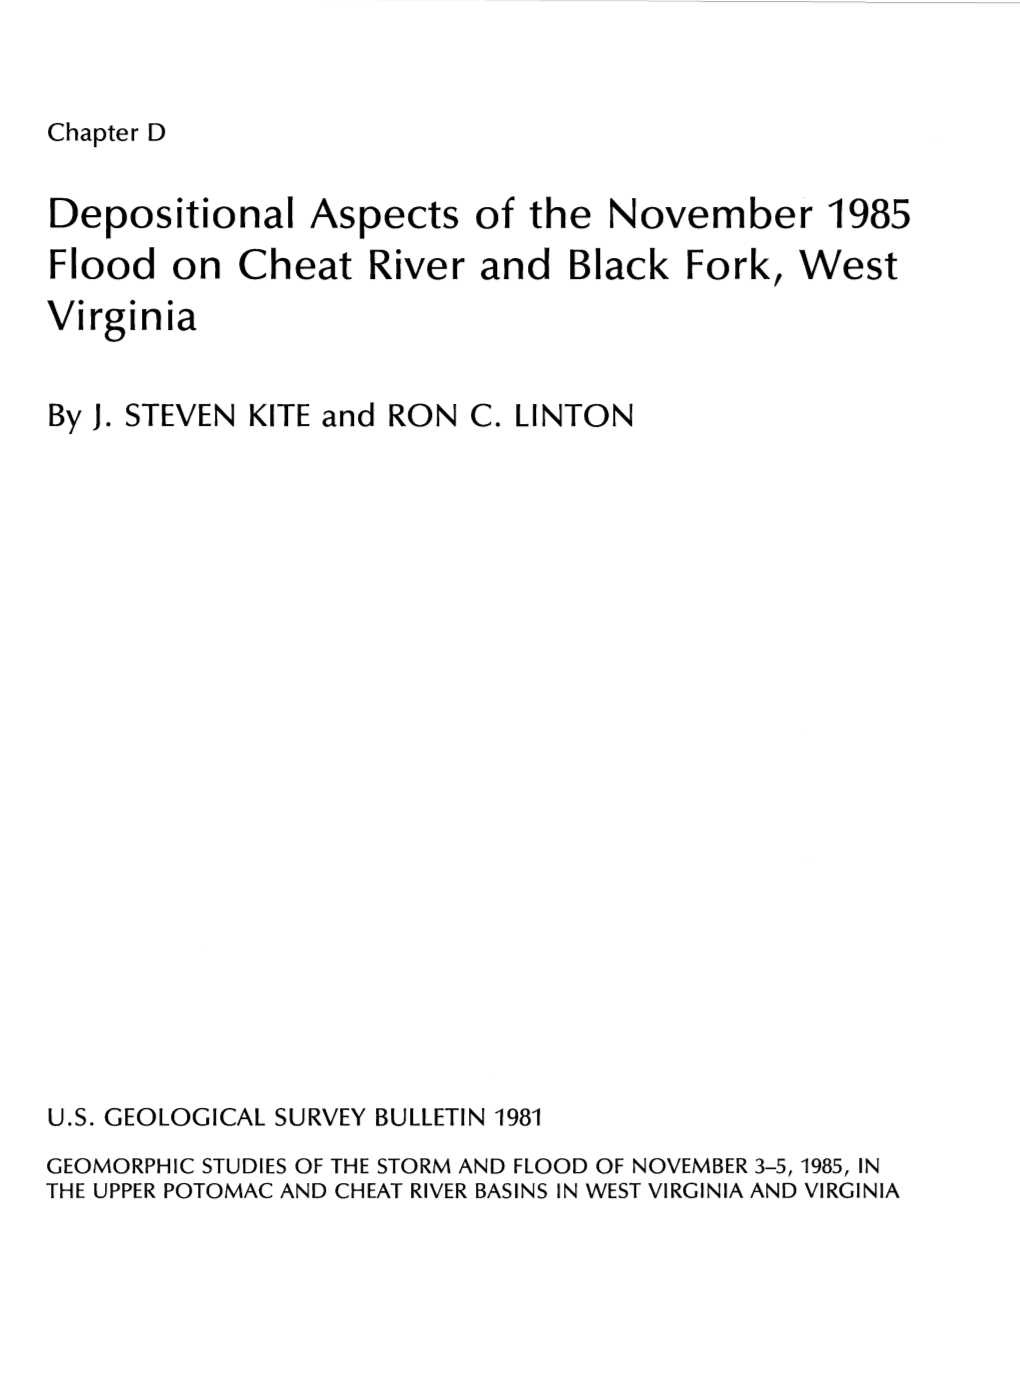 Depositional Aspects of the November 1985 Flood on Cheat River and Black Fork, West Virginia